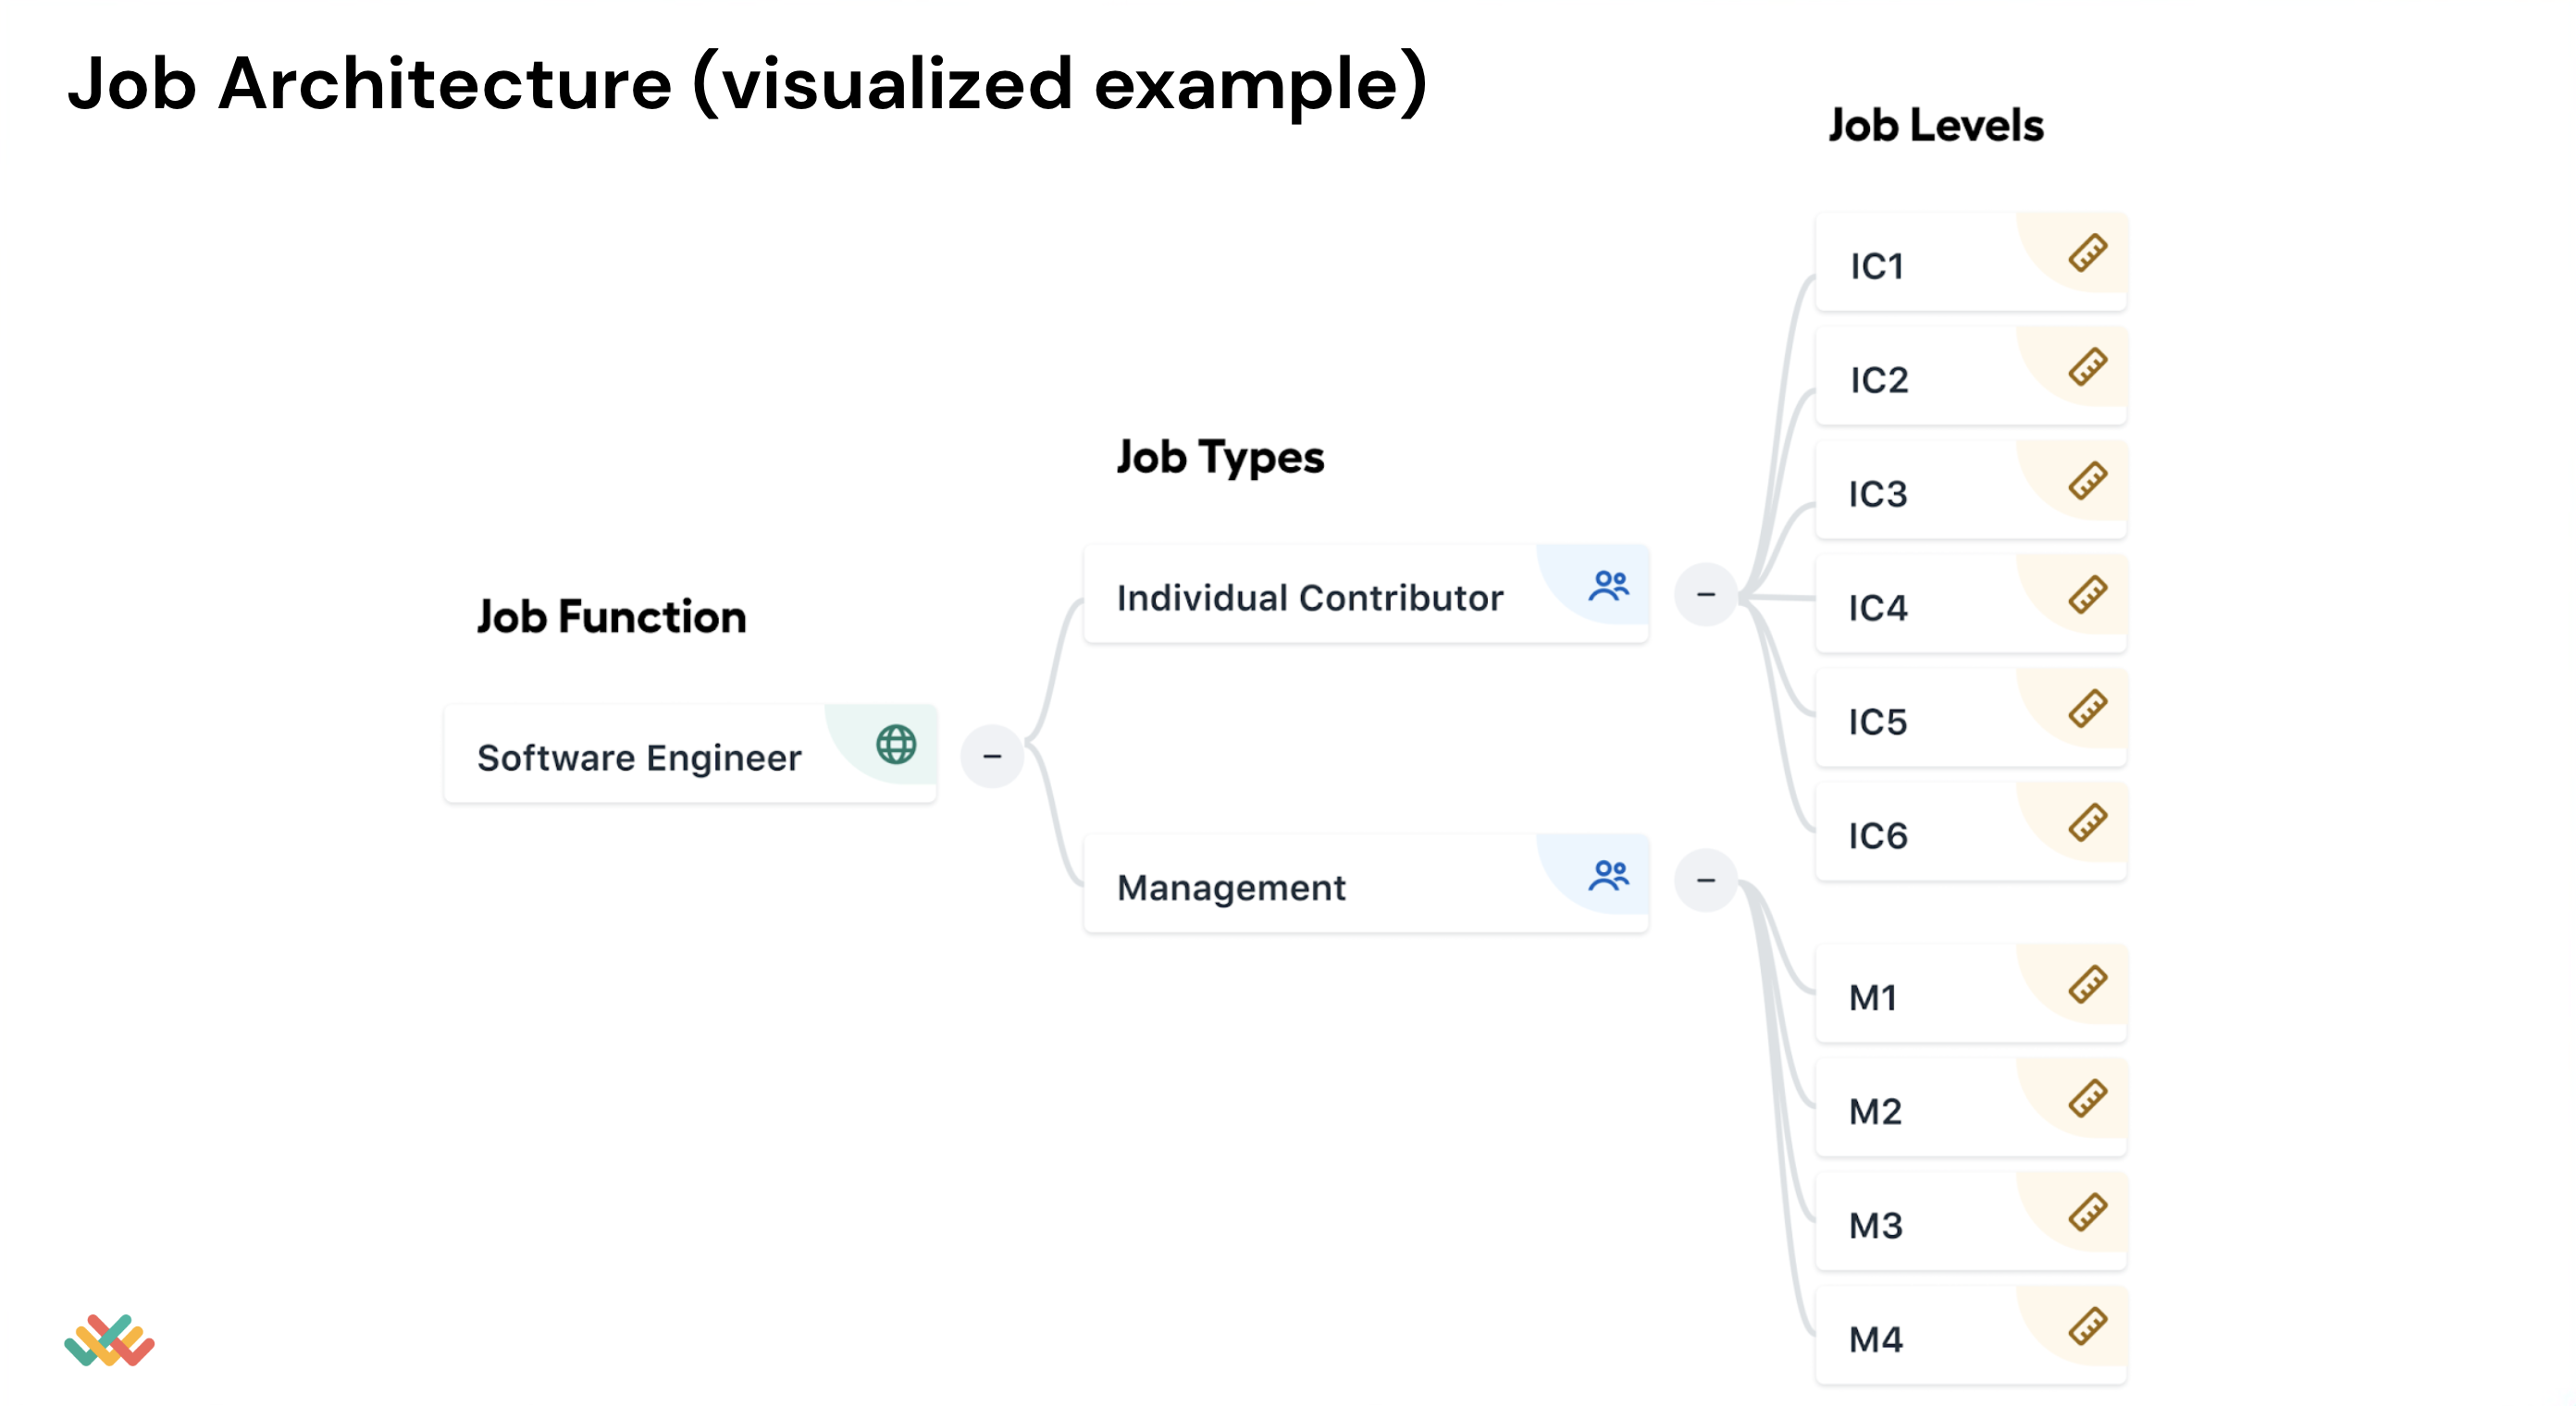 A visualized example of job architecture where the job function is software engineering, the job types are individual contributor and manager, and each job type has multiple job levels